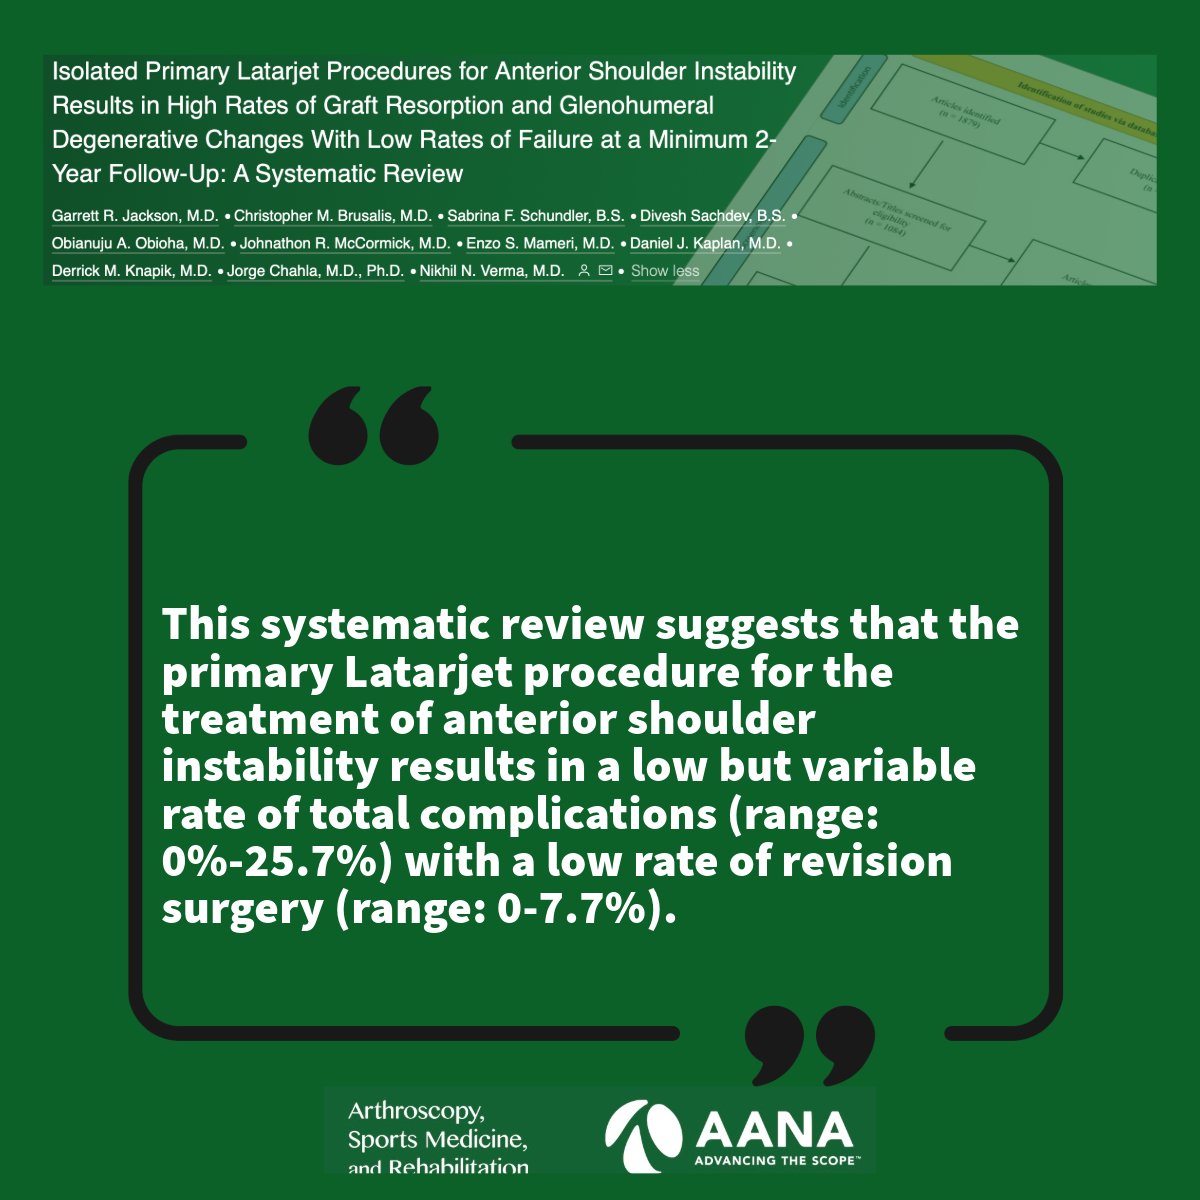 Check out the 2-year outcomes for Primary Latarjet from this recent systematic review! #ShoulderInstability #Latarjet @DrNikhilVerma @jachahla @Grjackson_MD ow.ly/REYl50Qy9uU